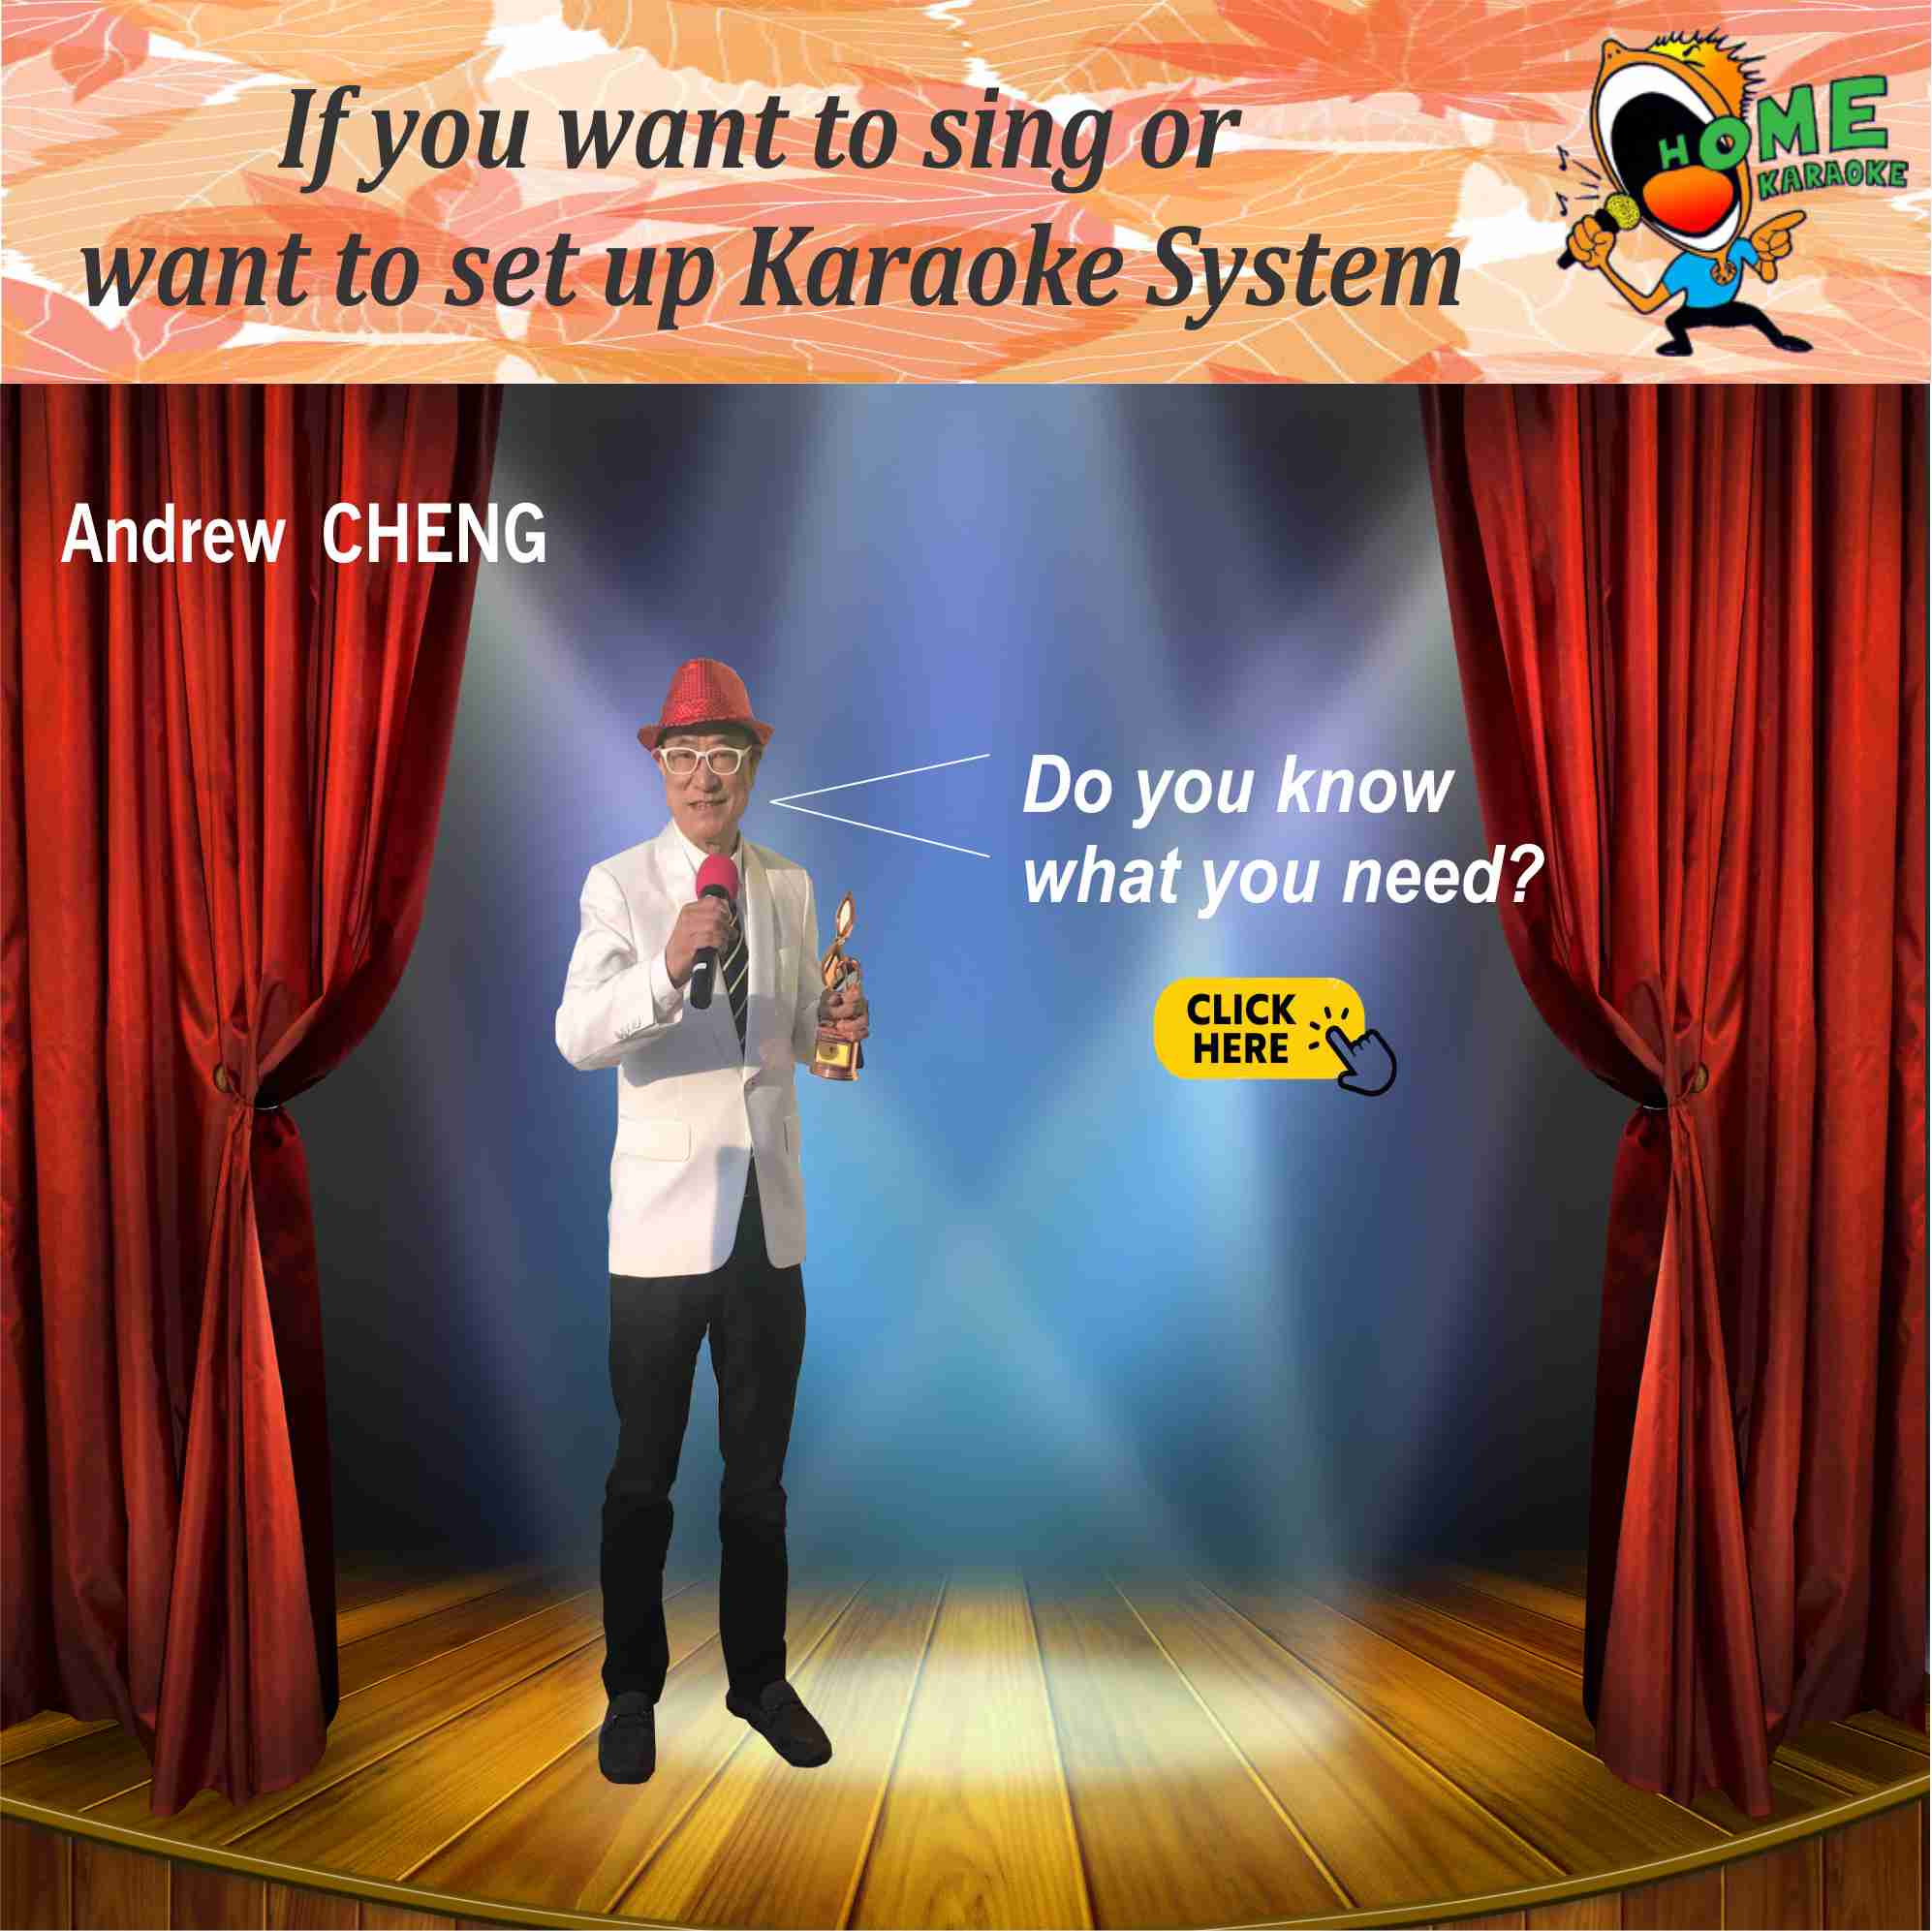 8. Want to sing? Know what you need?